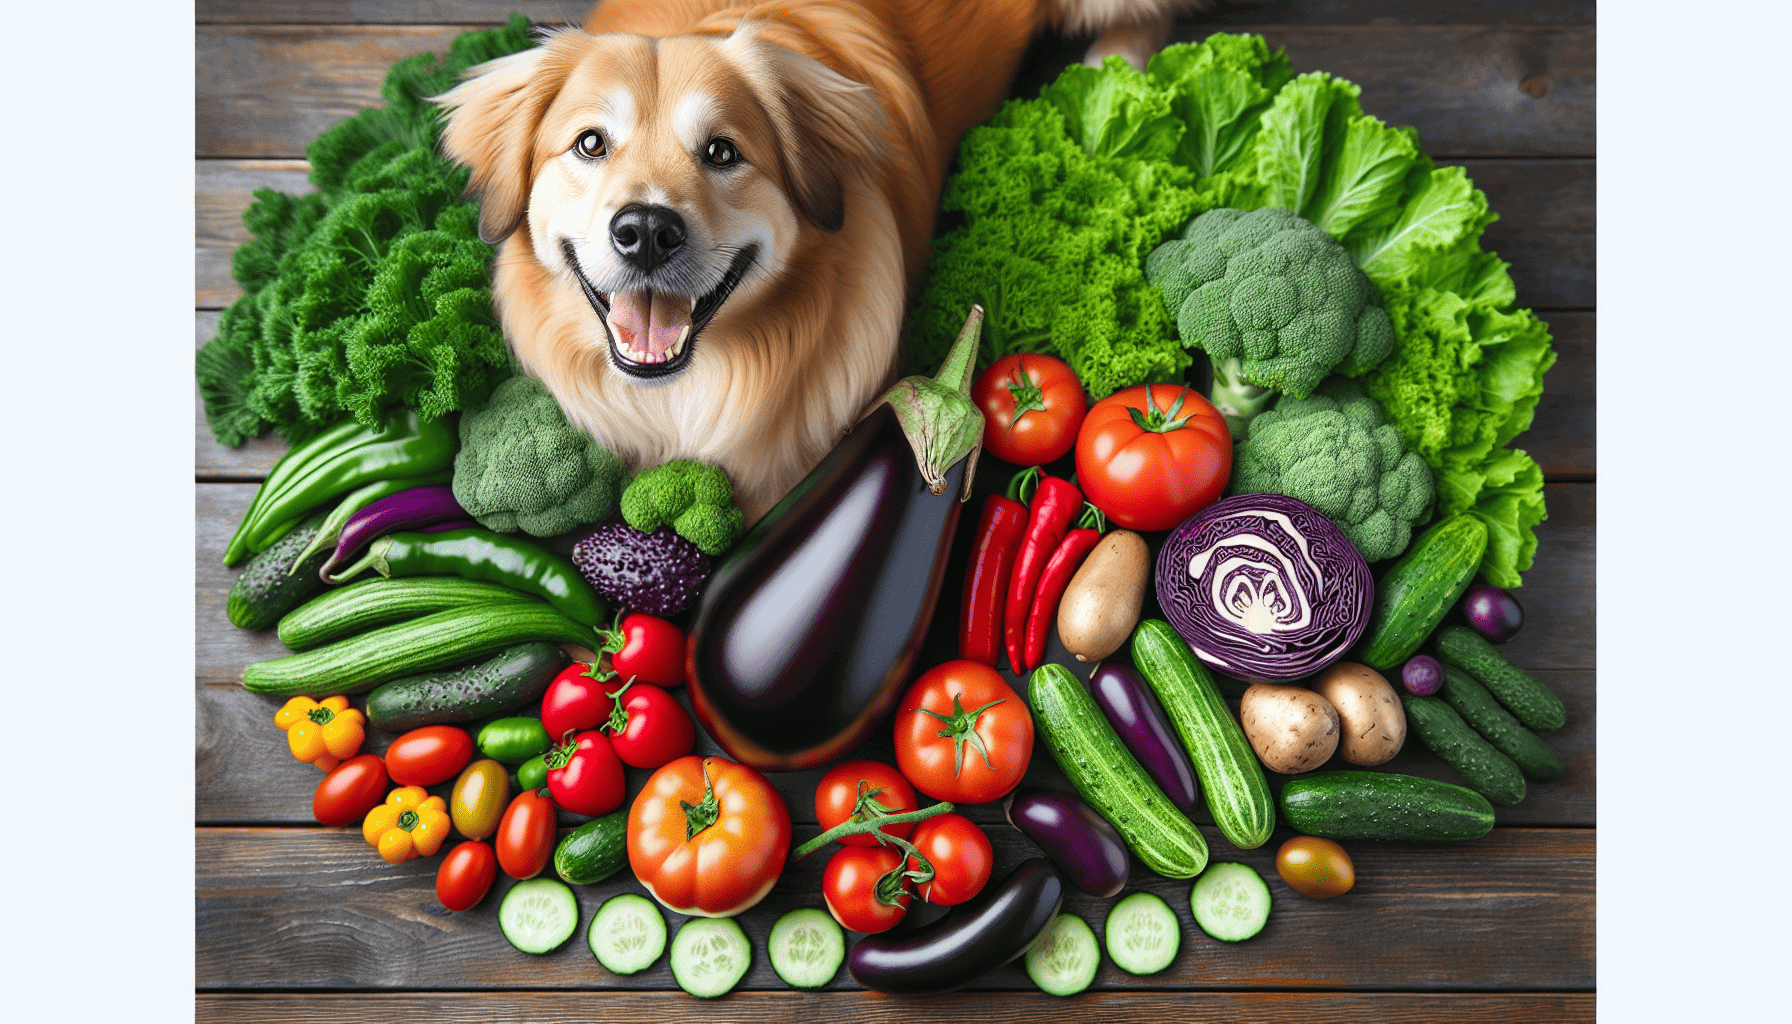 Mix of dog-friendly vegetables